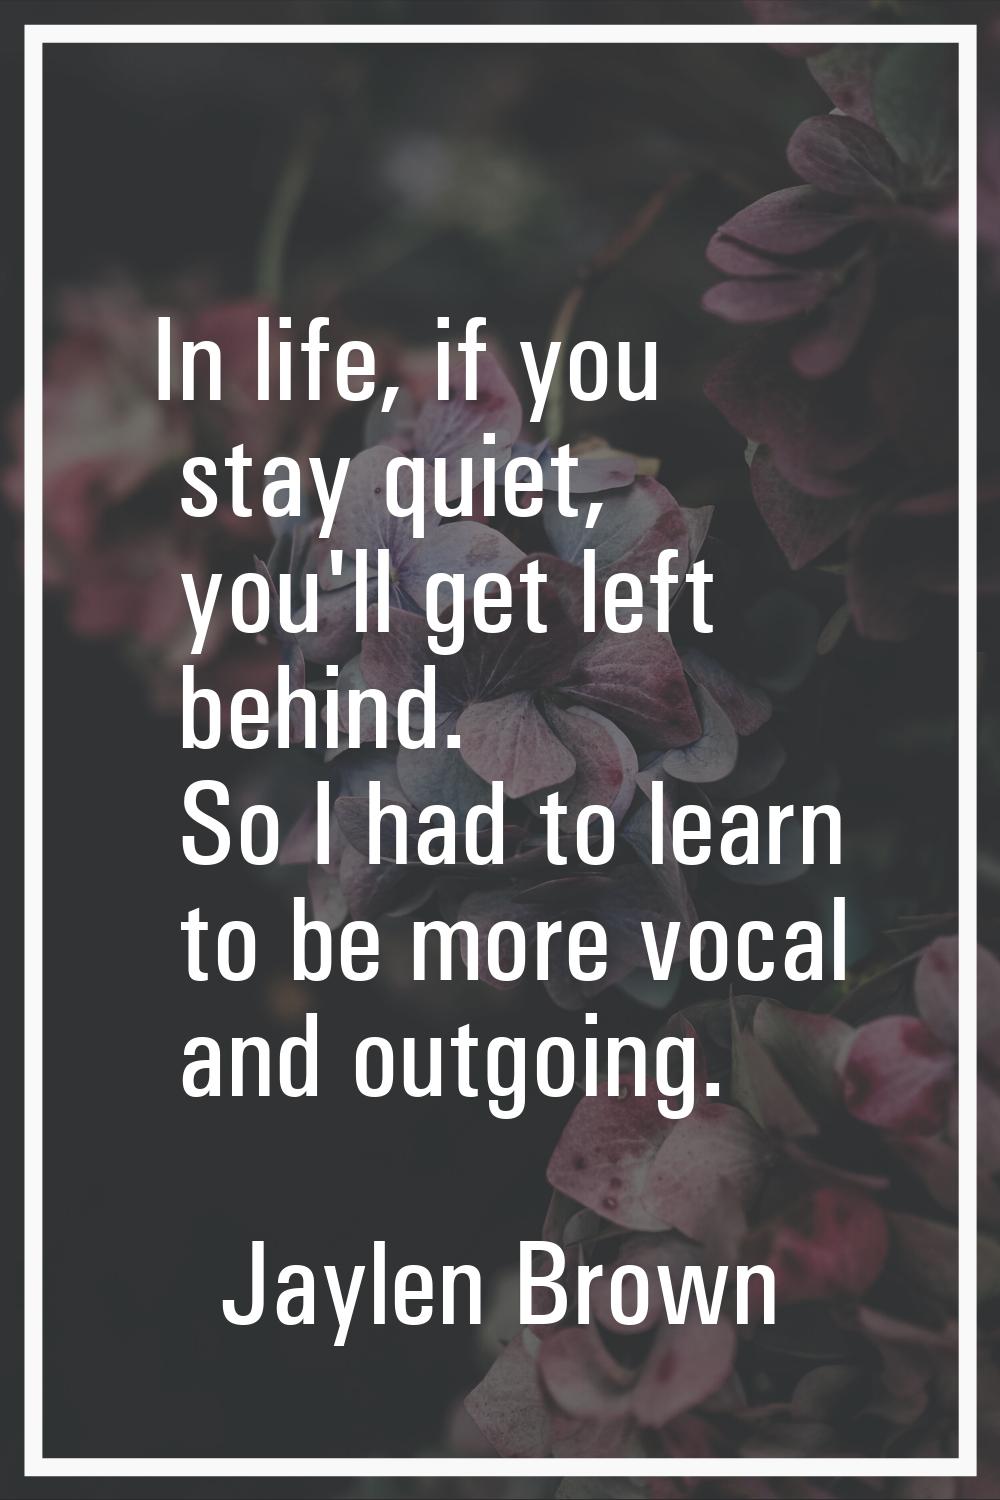 In life, if you stay quiet, you'll get left behind. So I had to learn to be more vocal and outgoing